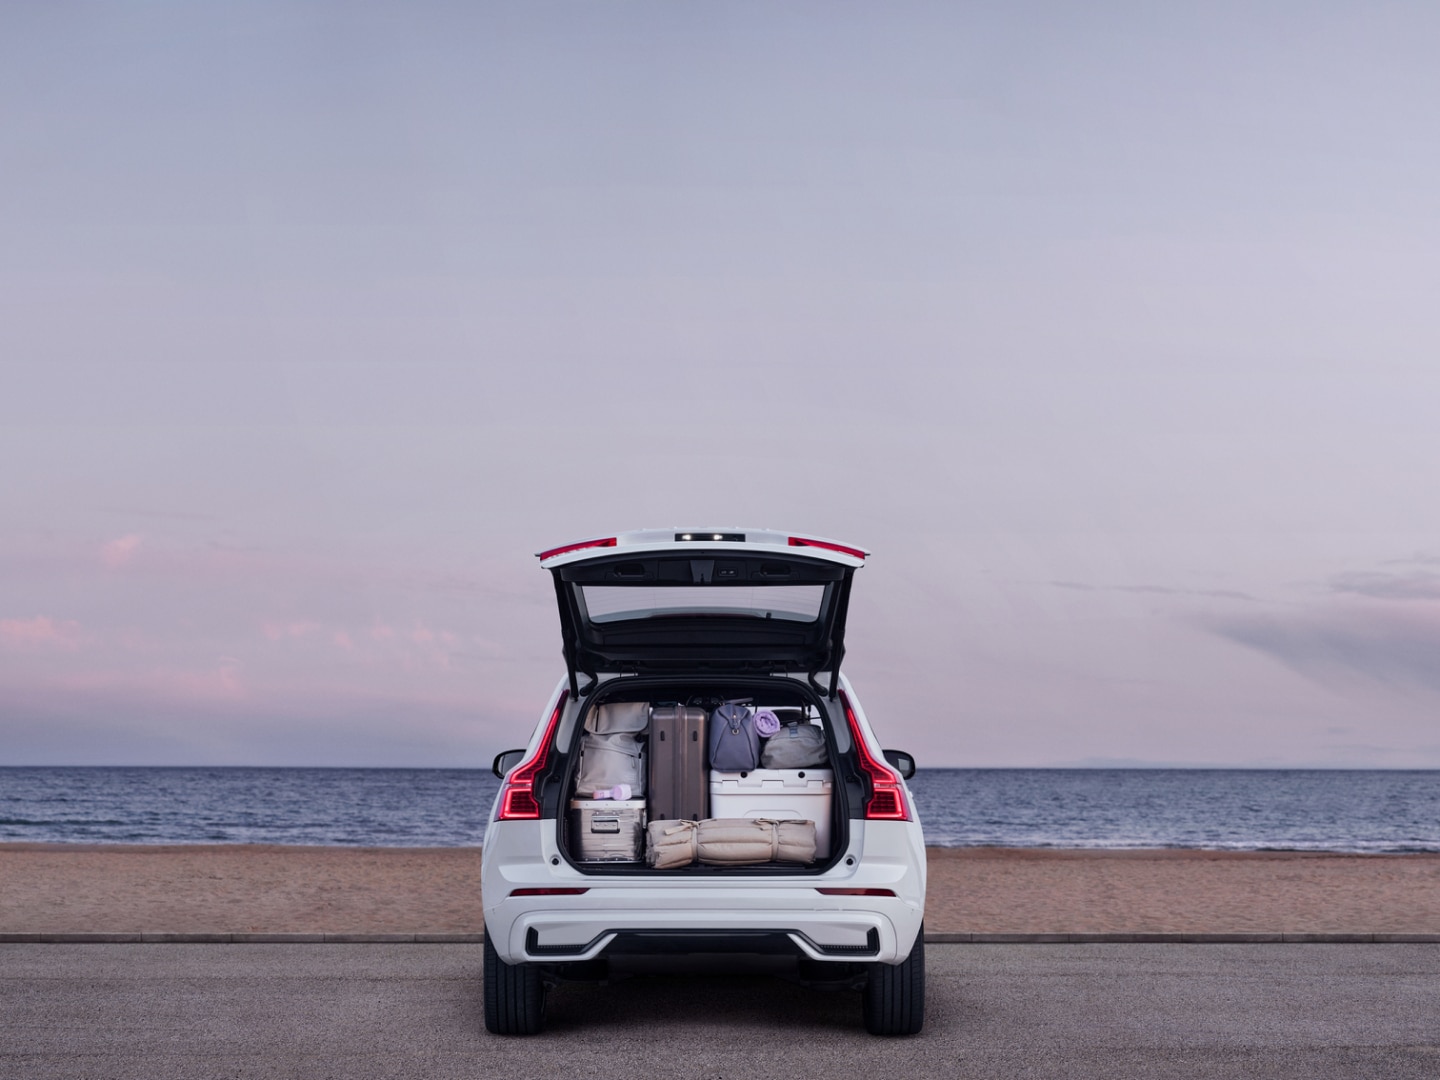 Rear view of a Volvo XC60 plug-in hybrid with the trunk open showing the amount of luggage that fits.